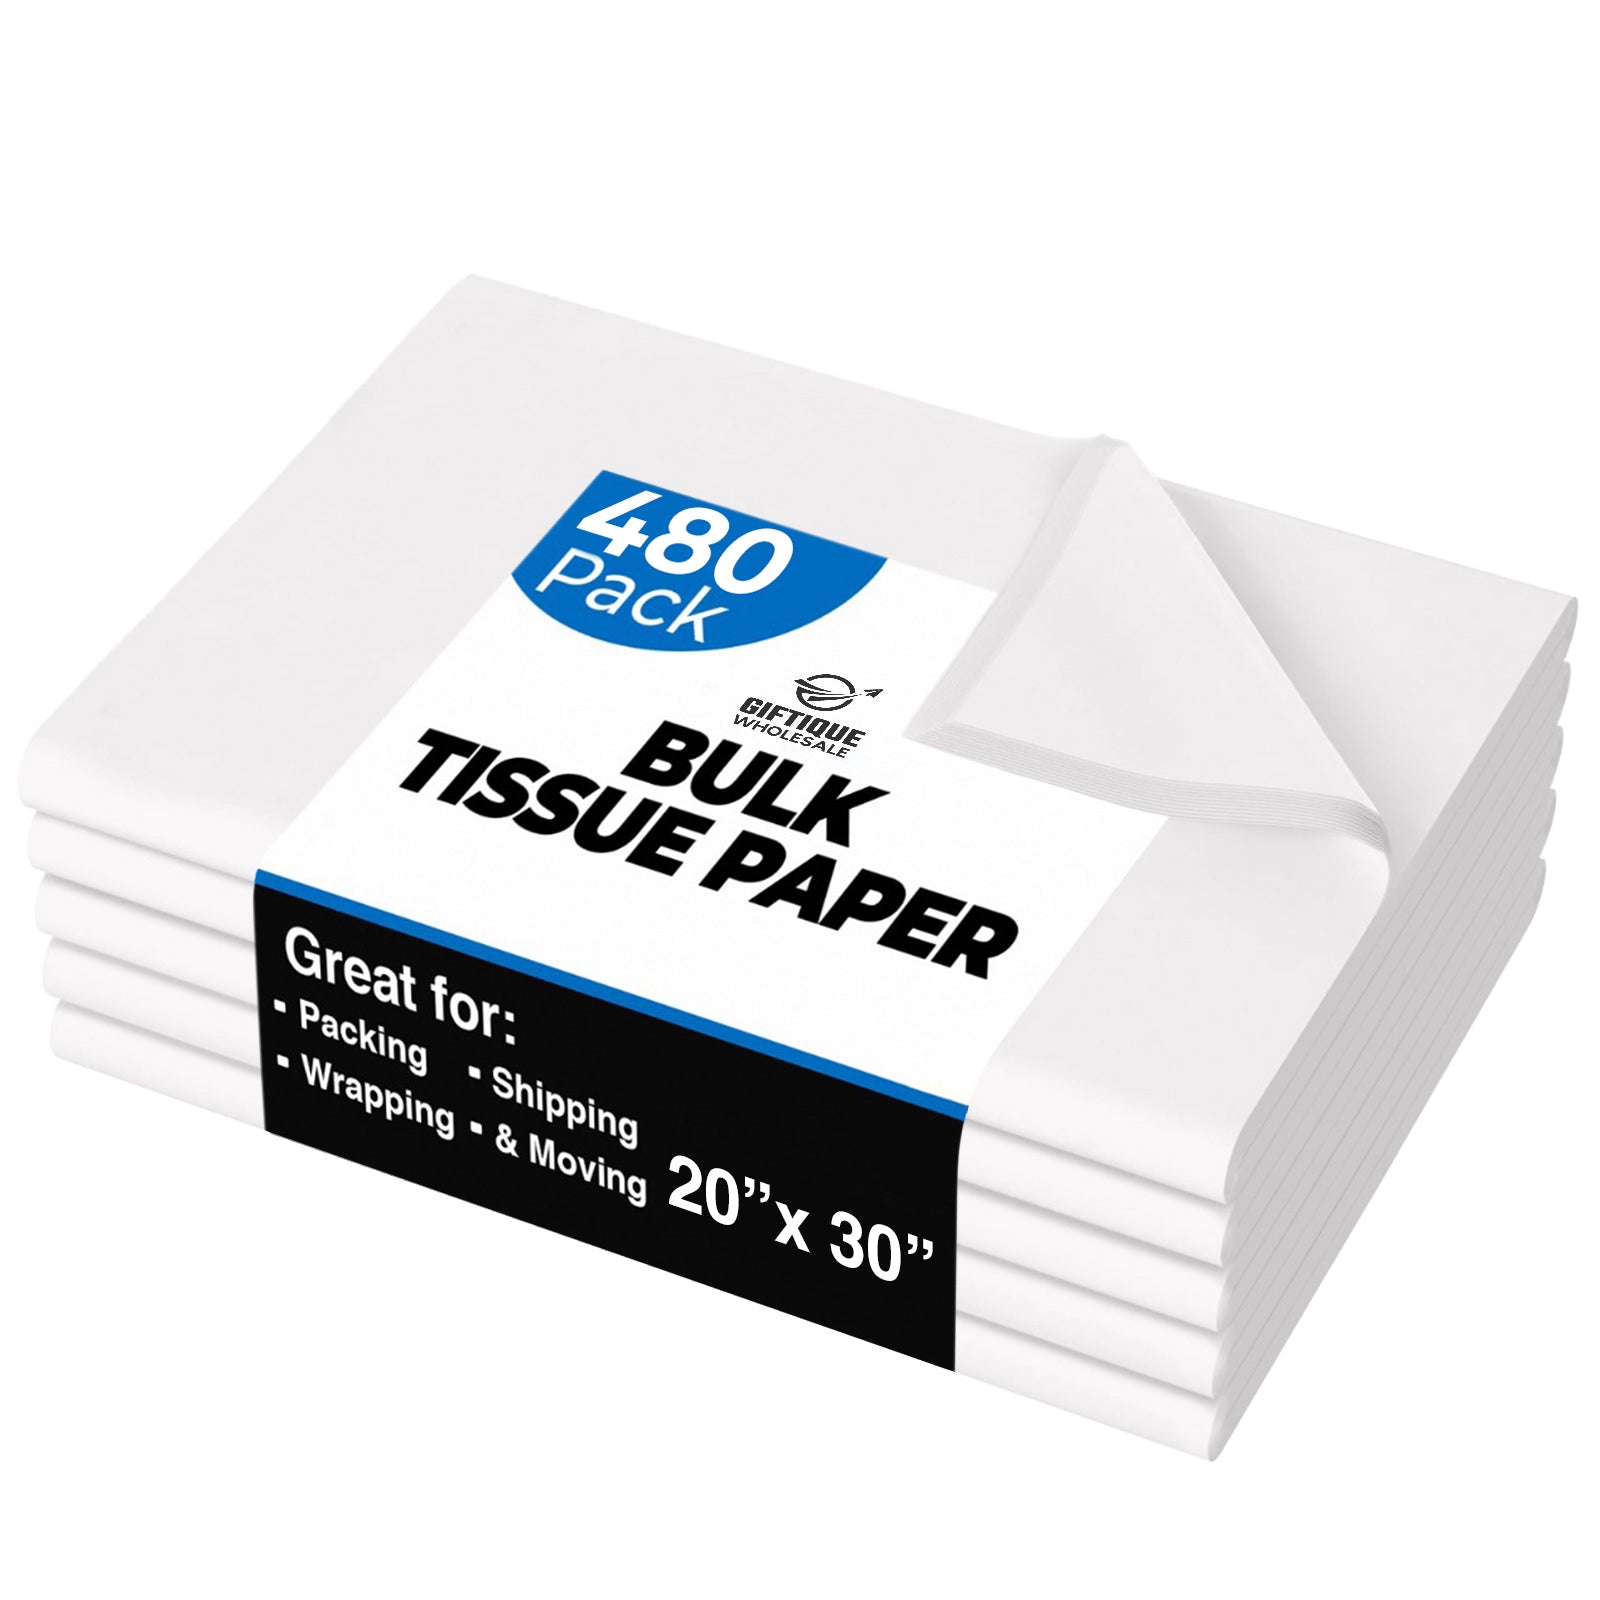 Gift Wrap Tissue Paper 20 X 30-48 Sheets (White) Acid Free Paper Made in USA